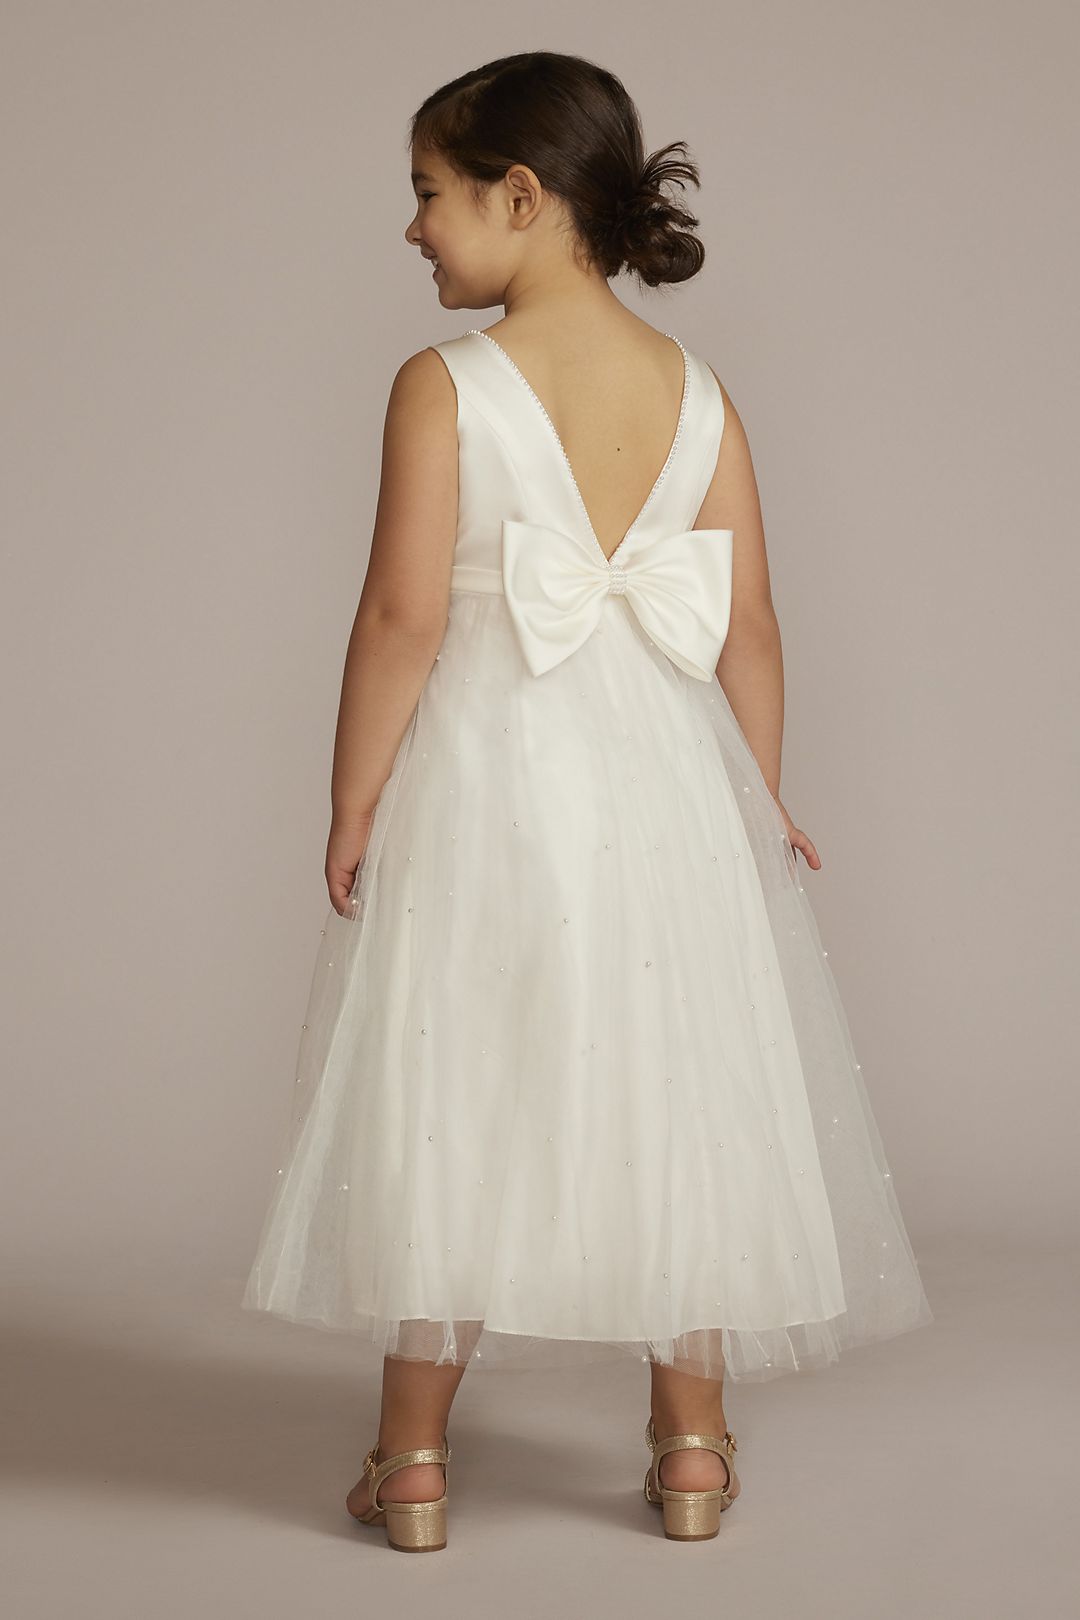 V-Back Tulle Flower Girl Dress with Pearls and Bow Image 2